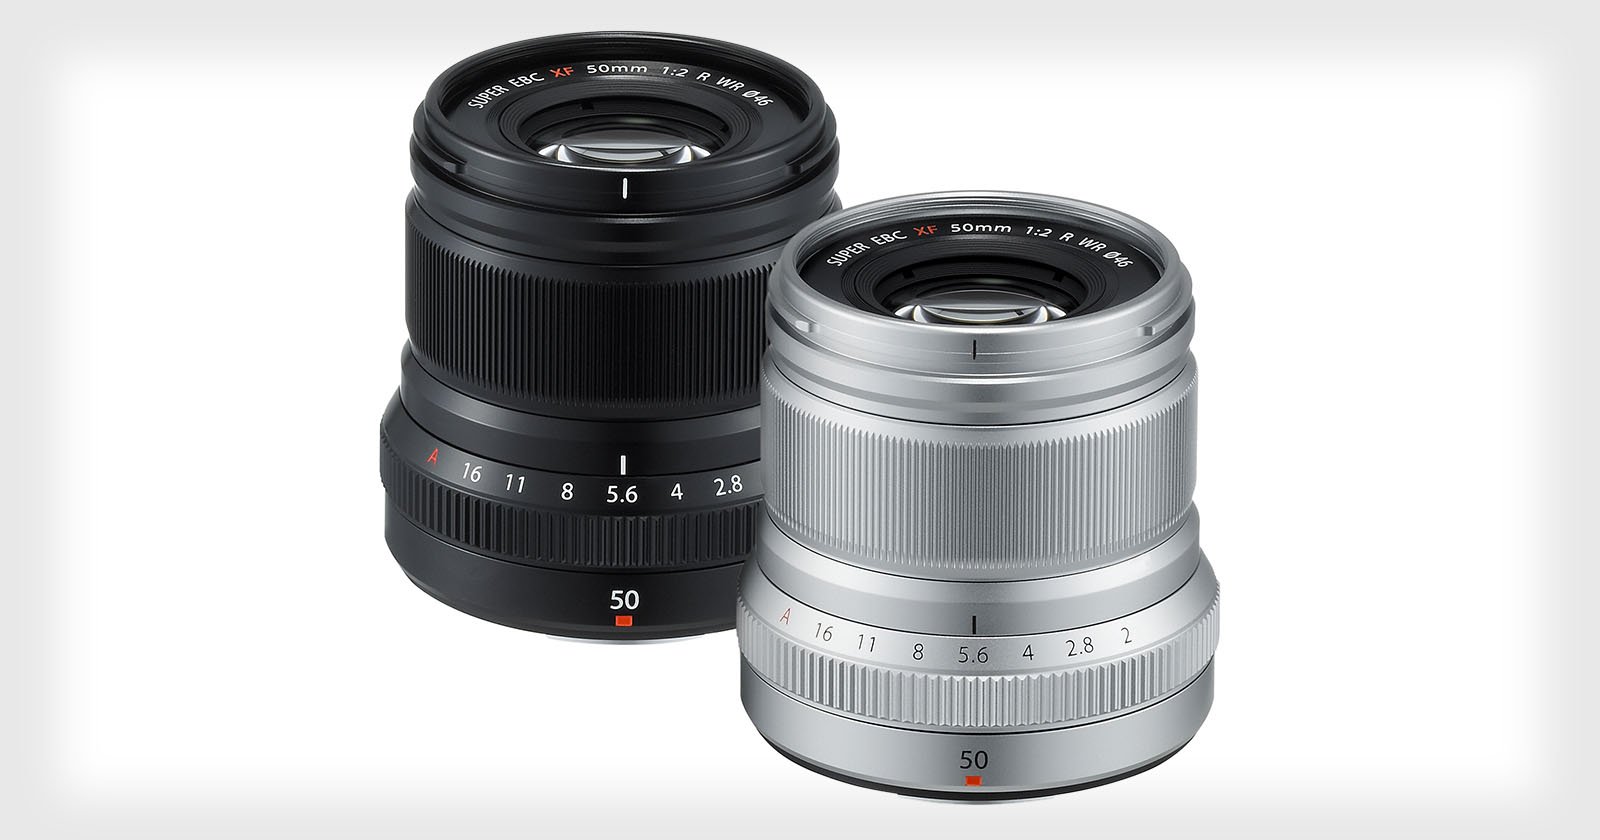 Fujifilms New XF 50mm f/2 R WR is a Durable Travel Lens